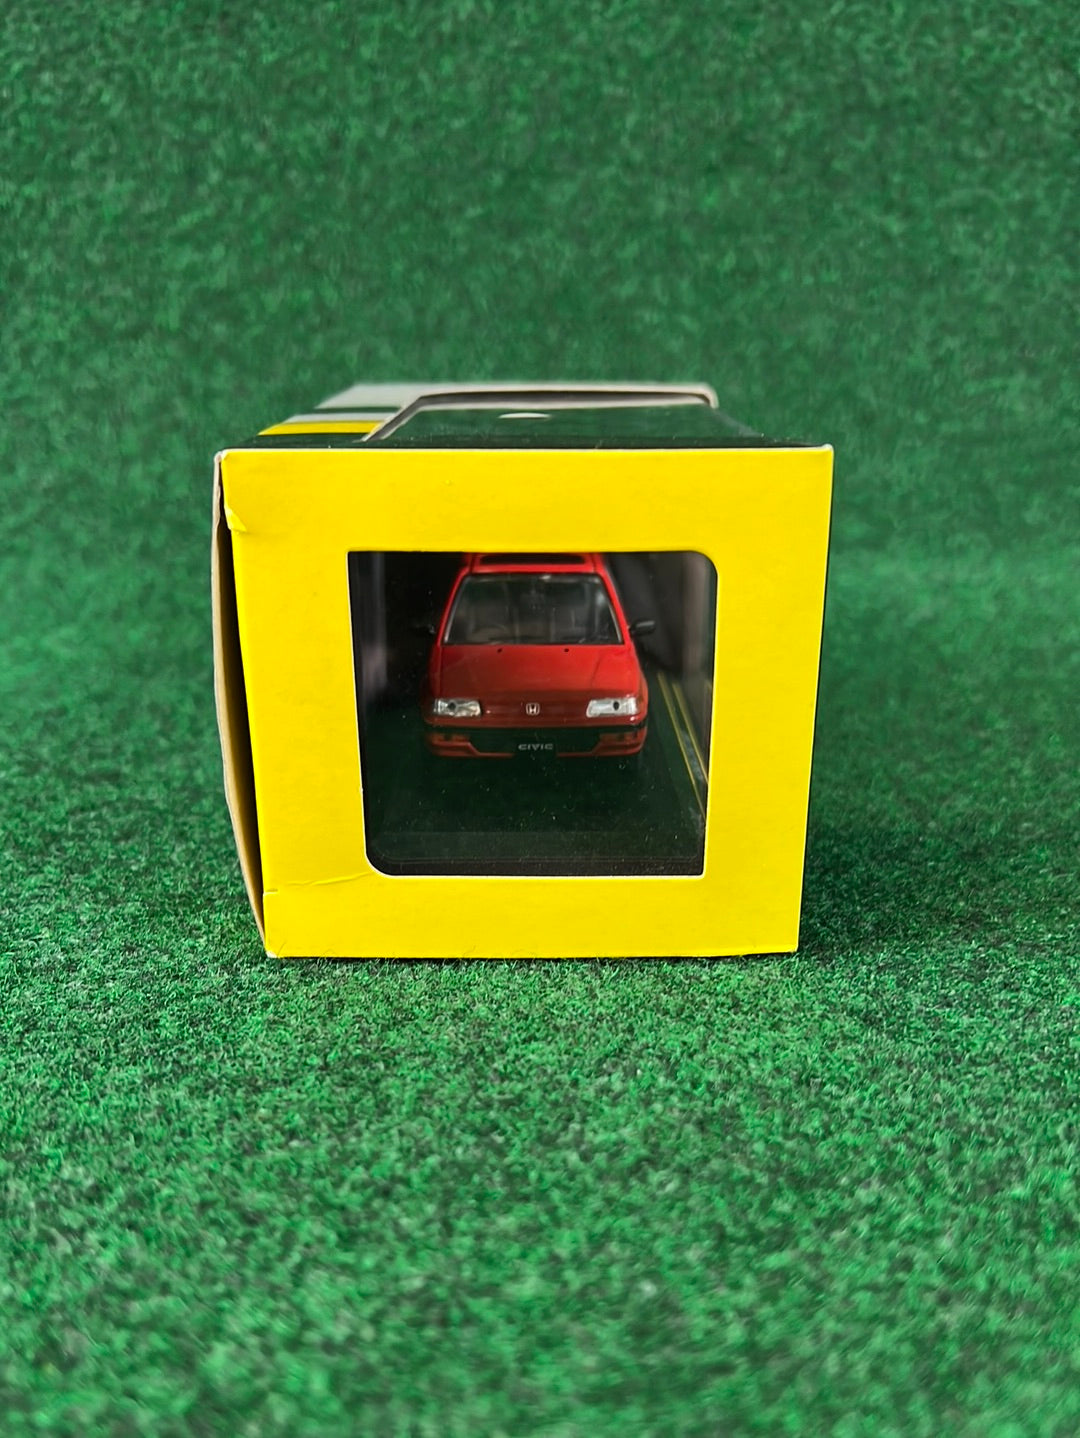 First:43 Models - 1987 Honda Civic Hatchback - Red 1/43 Scale Diecast